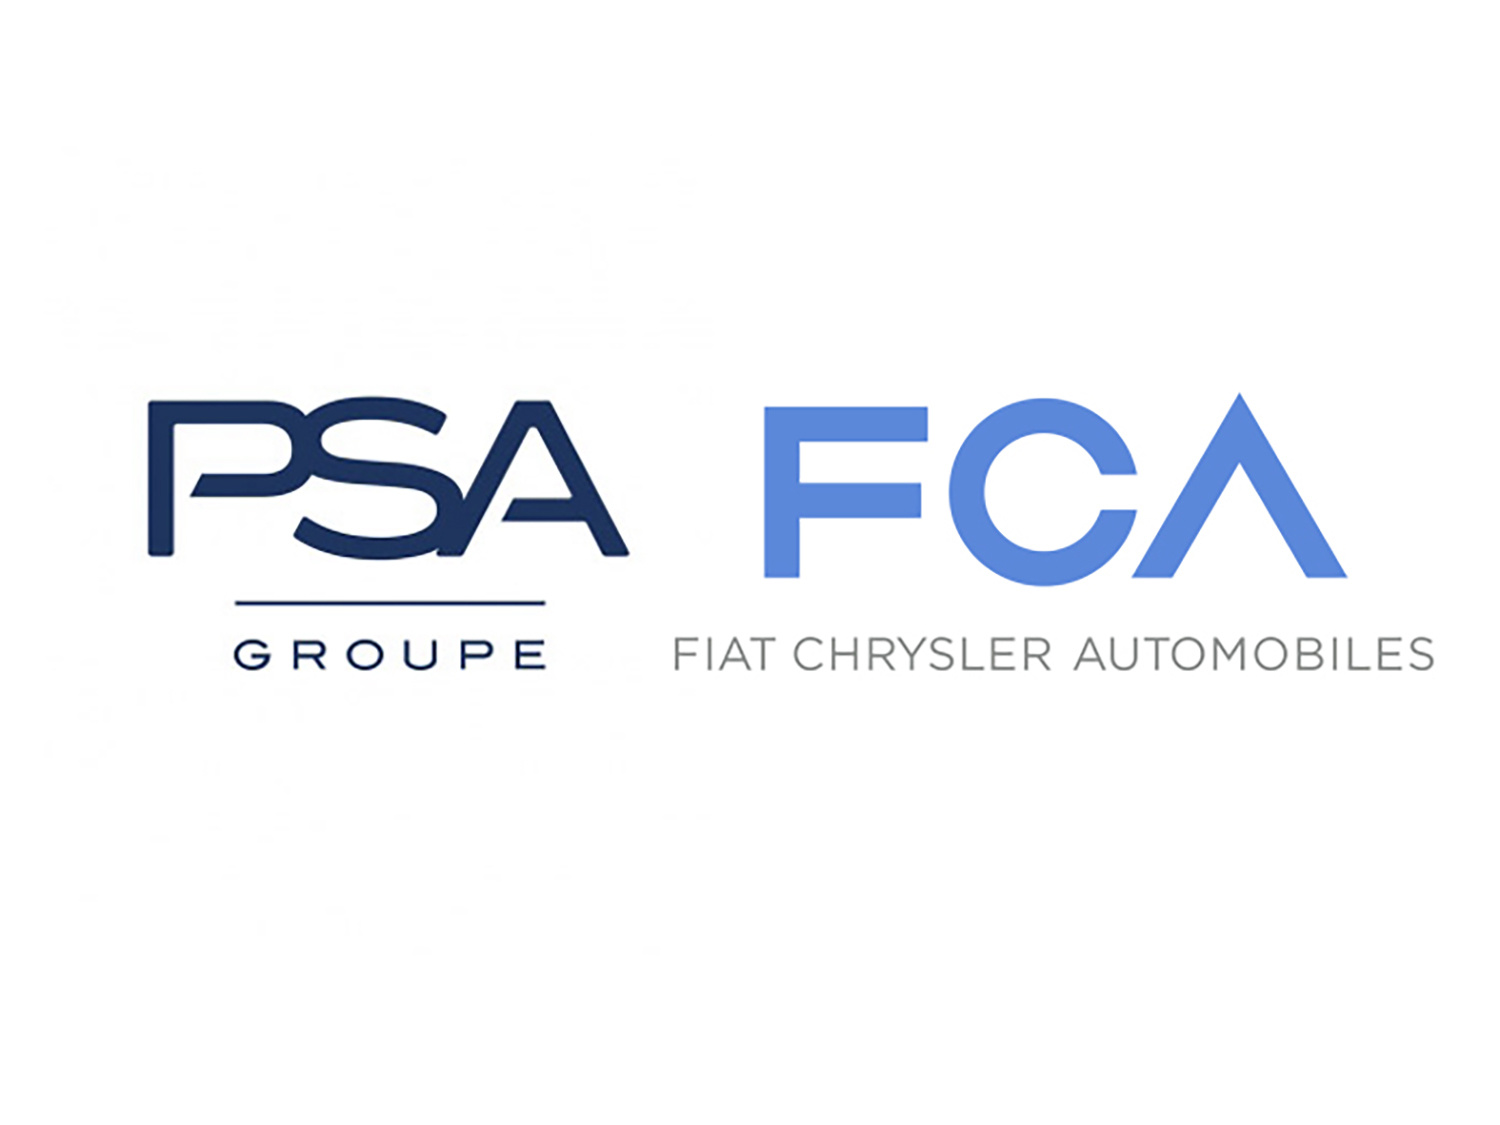 The boards of FCA and PSA Group have approved a merger between the two companies.